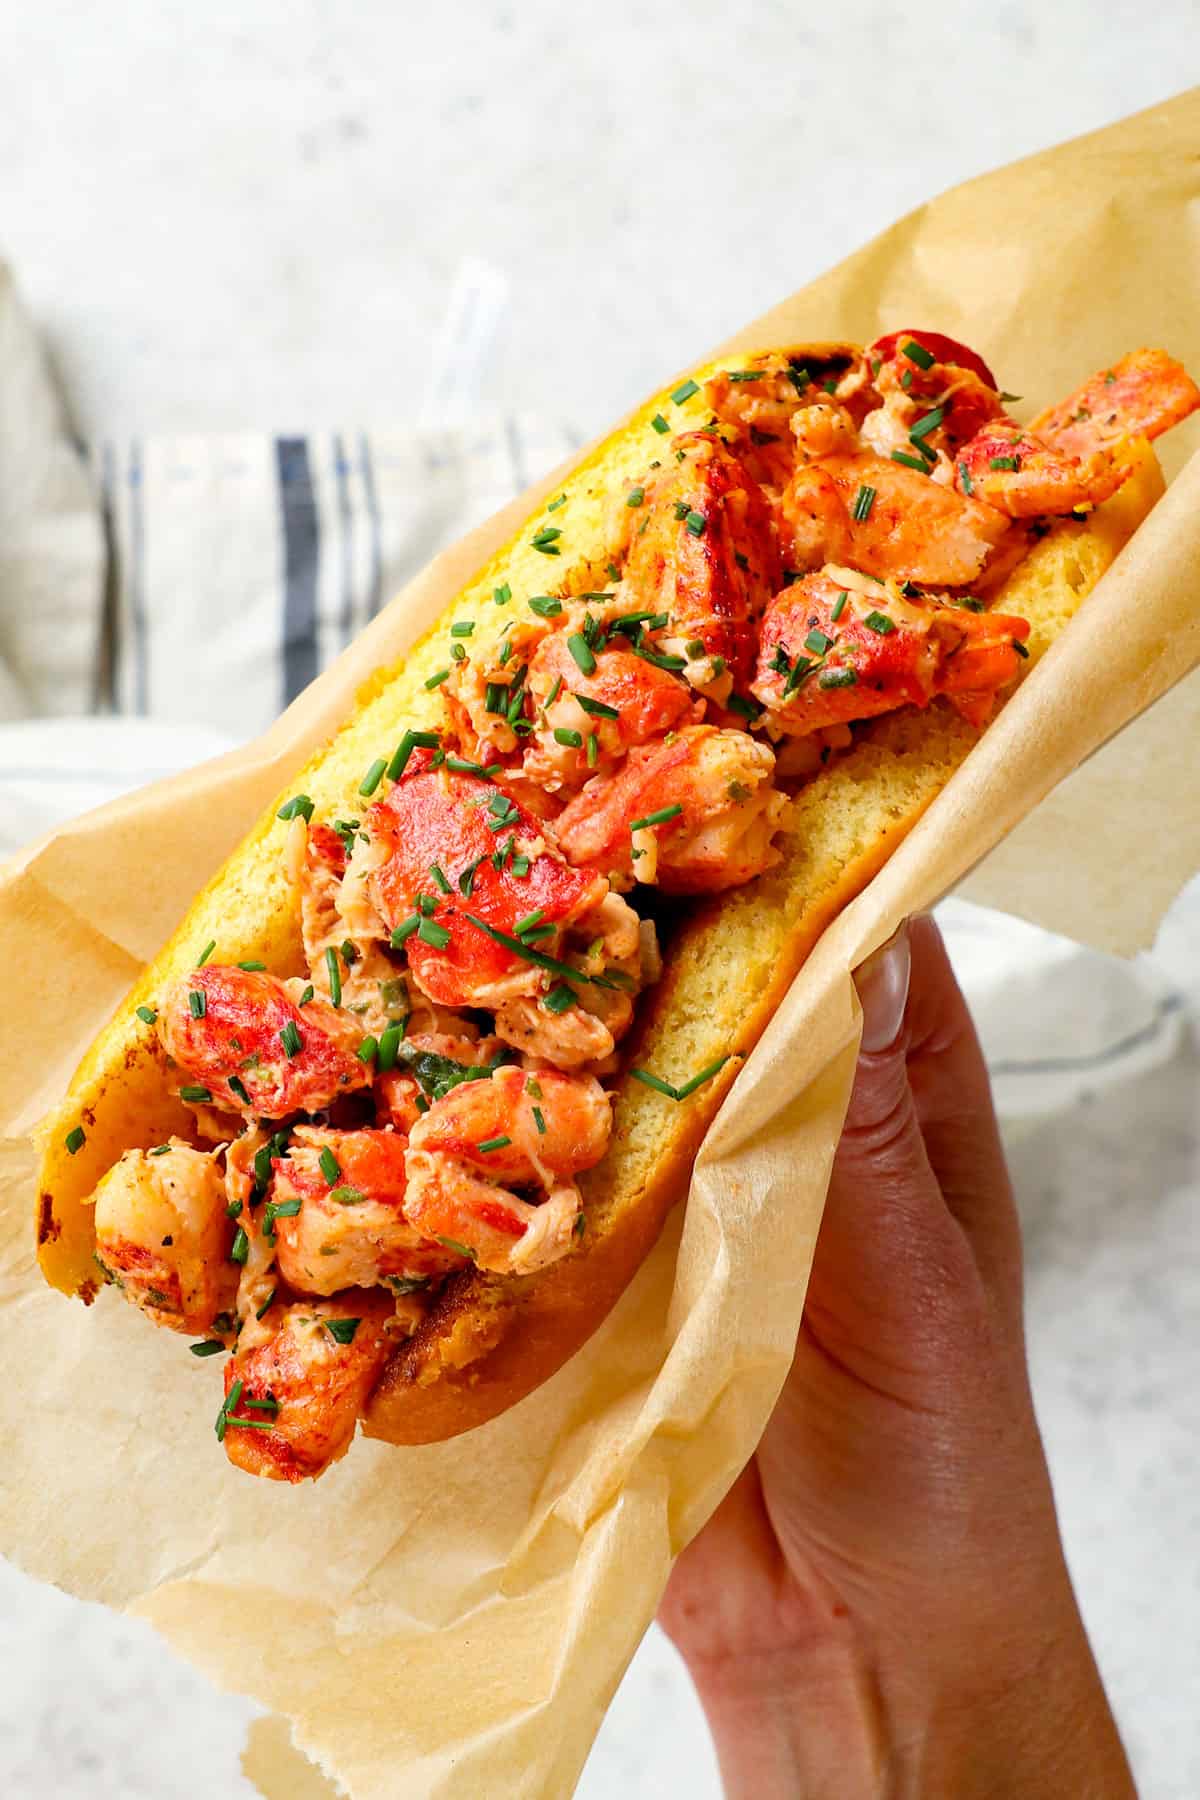 up closer of holding a lobster roll showing the juicy lobster meat